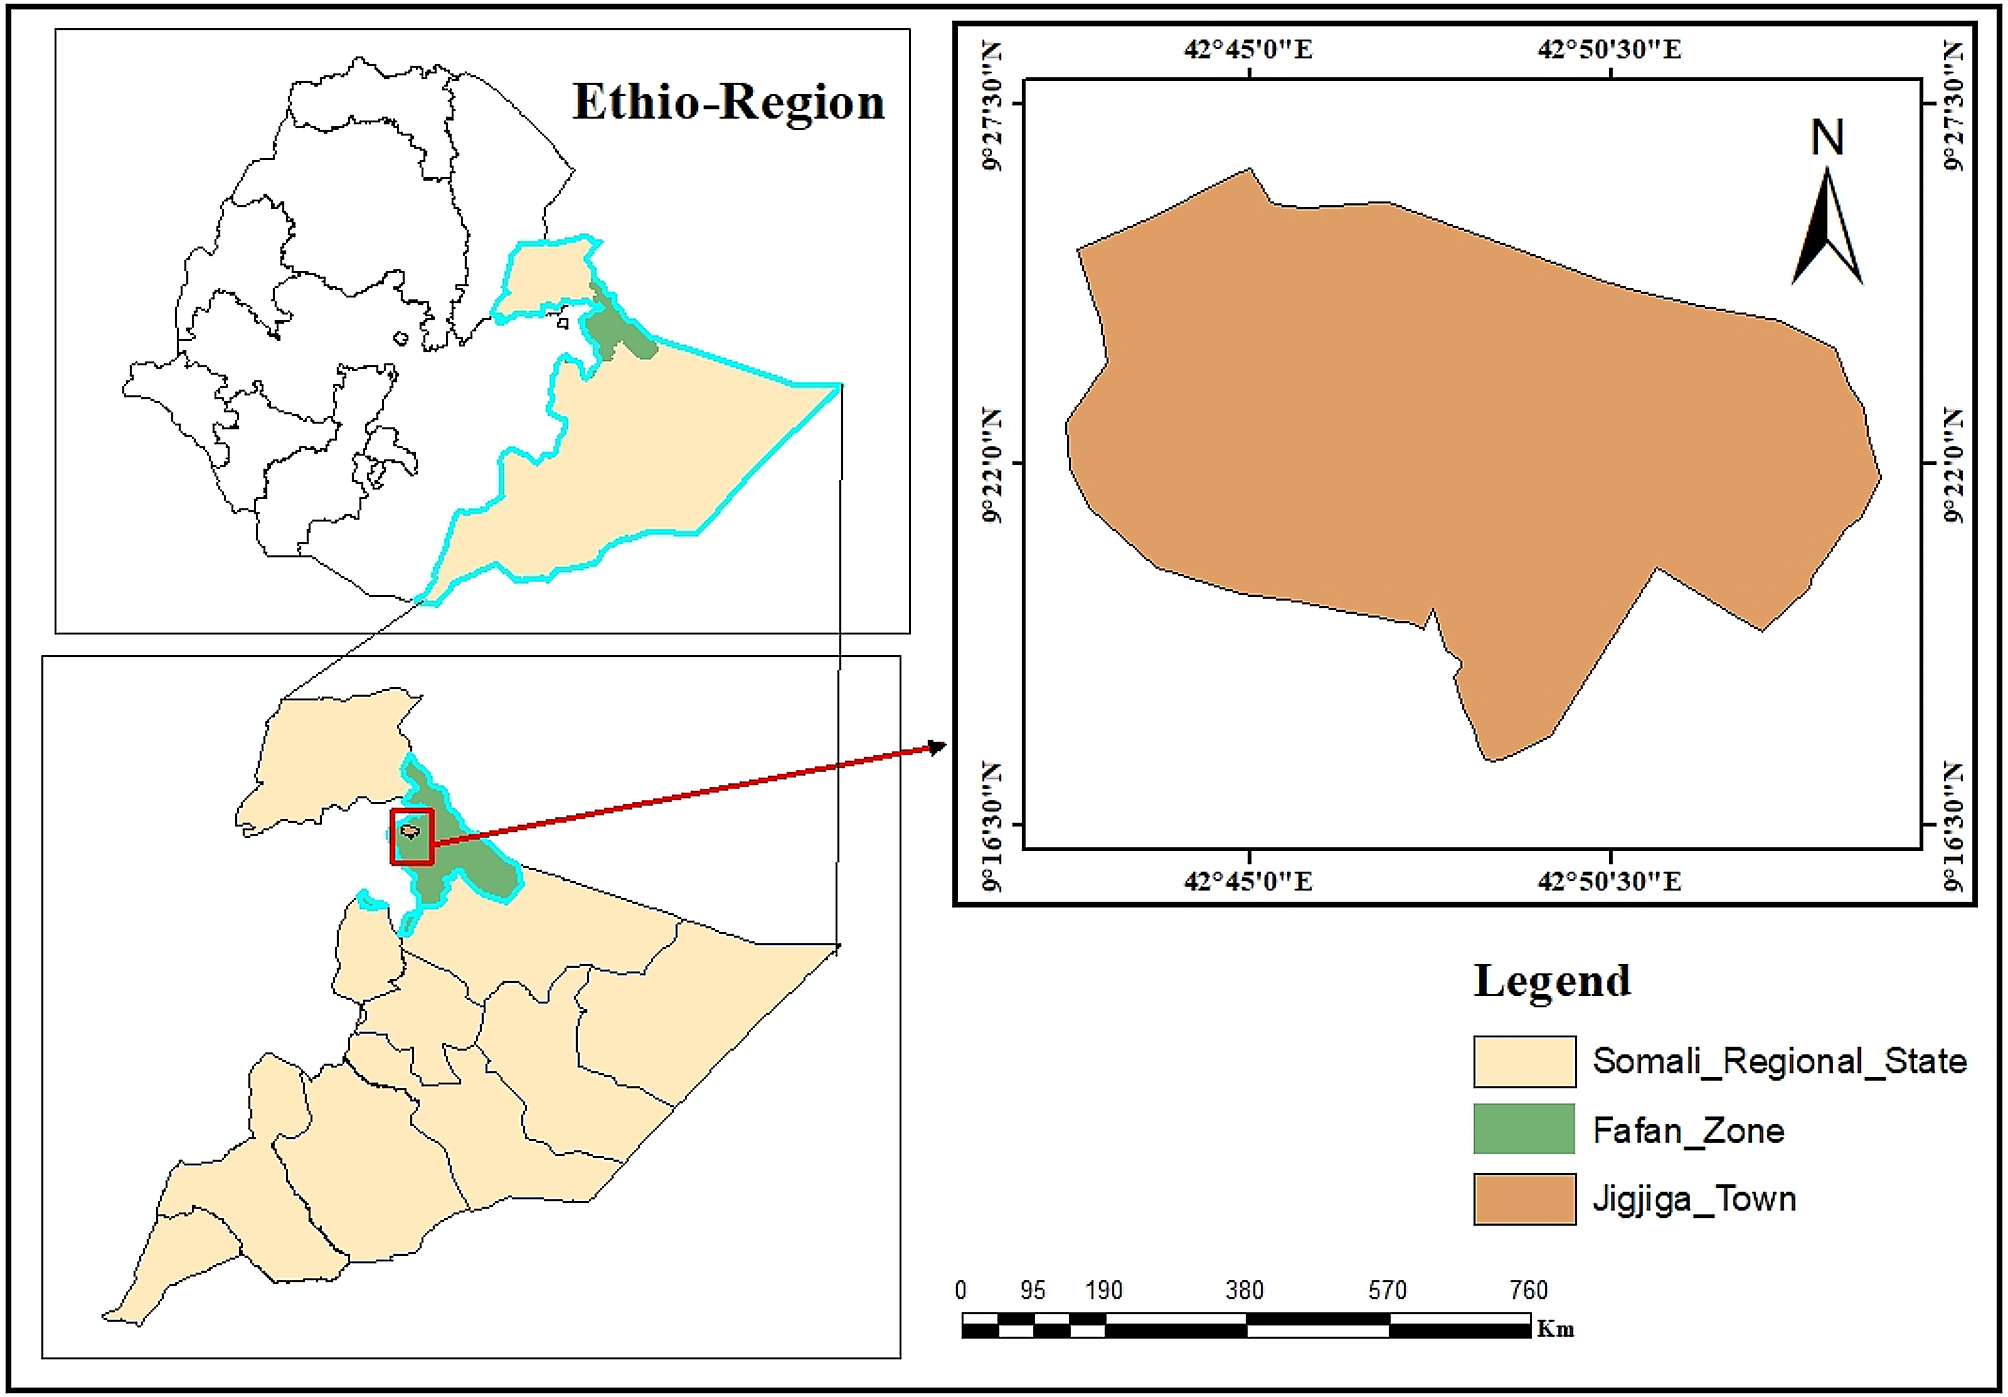 Occurrence, antibiotic resistance profiles and associated risk factors of Klebsiella pneumoniae in poultry farms in selected districts of Somalia Reginal State, Ethiopia